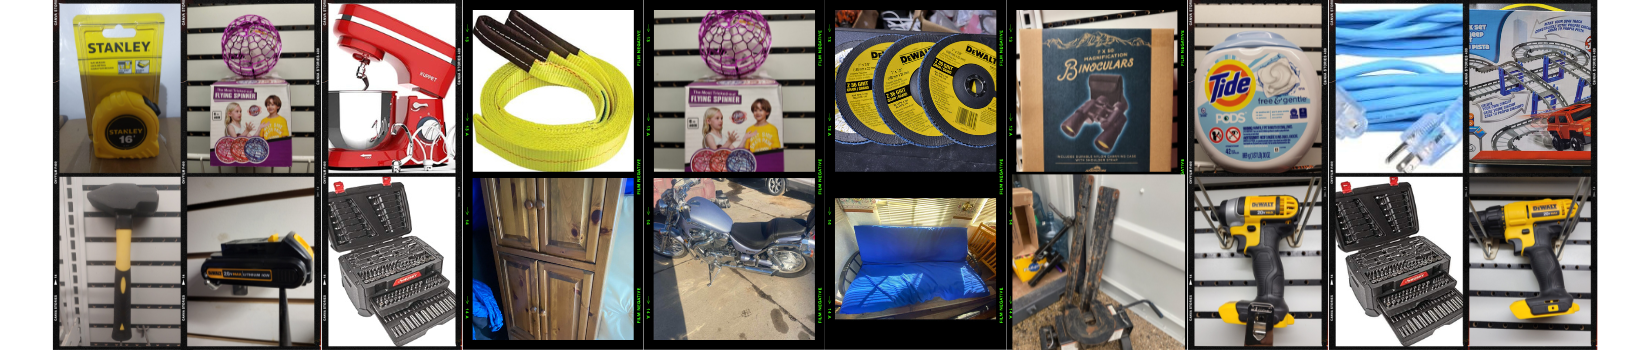 Zehr's First of the New Year January 12th Online Auction